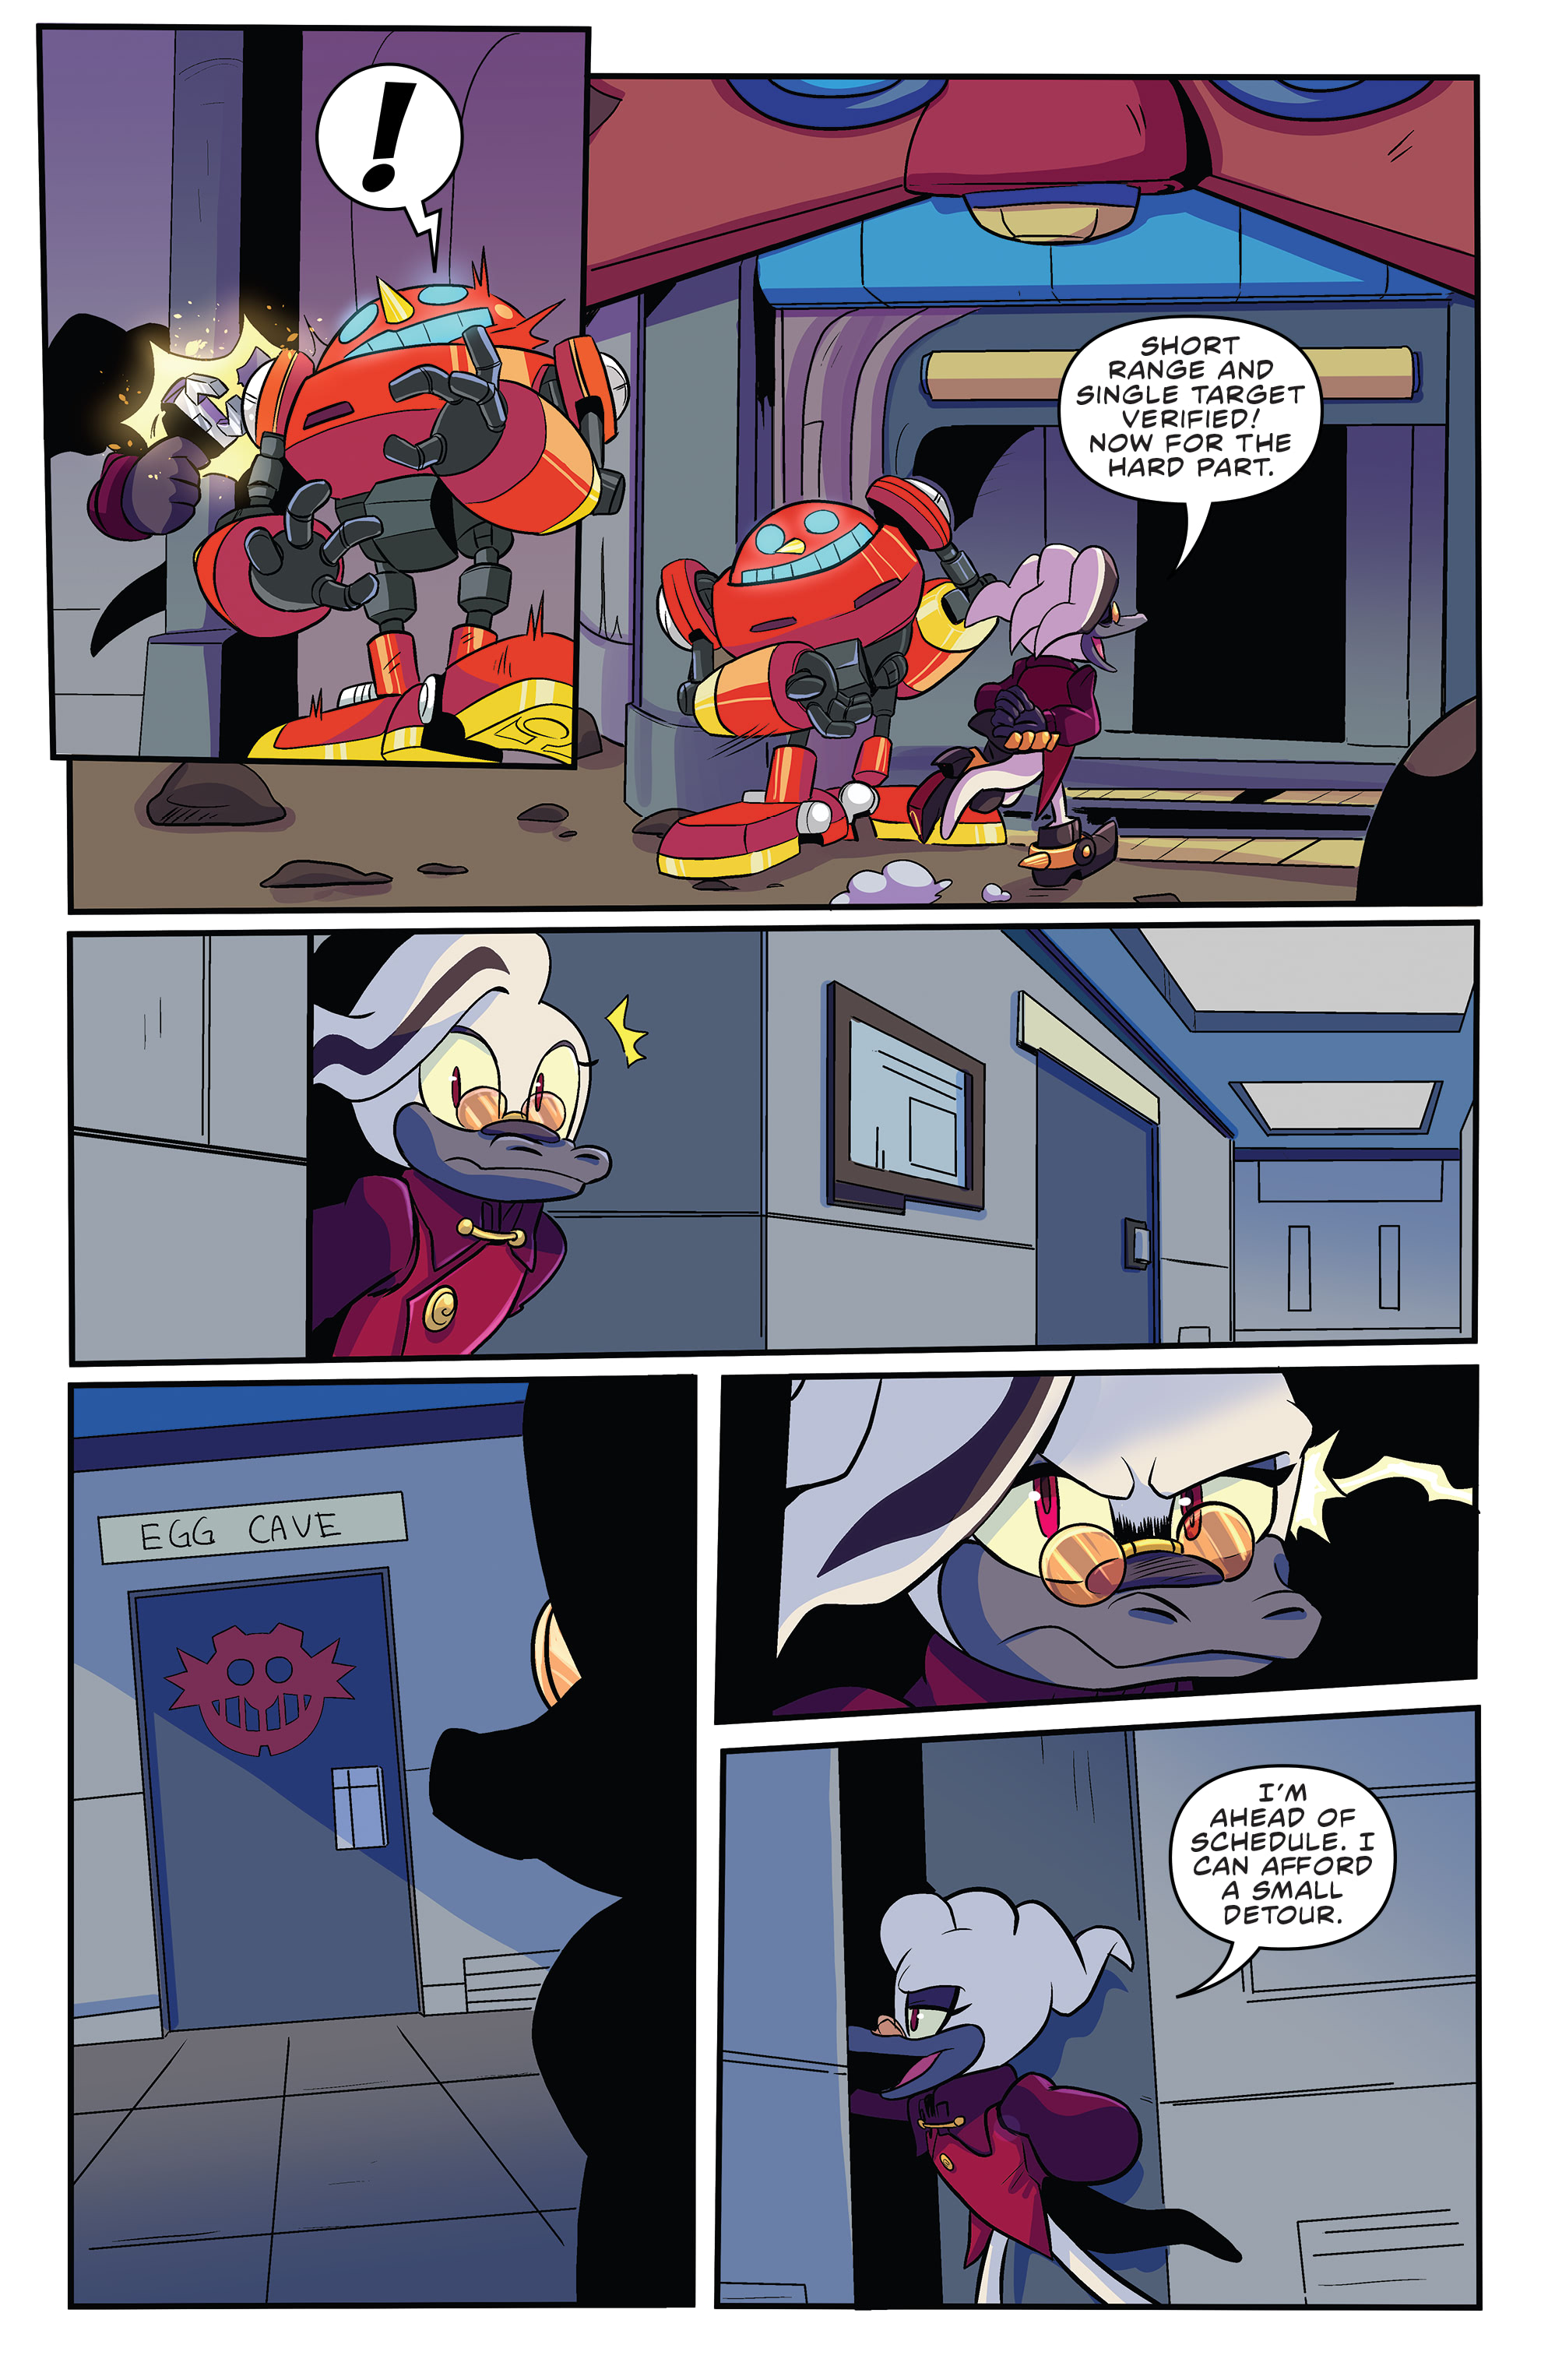 Sonic The Hedgehog Imposter Syndrome 2021 Chapter 2 Page 11 